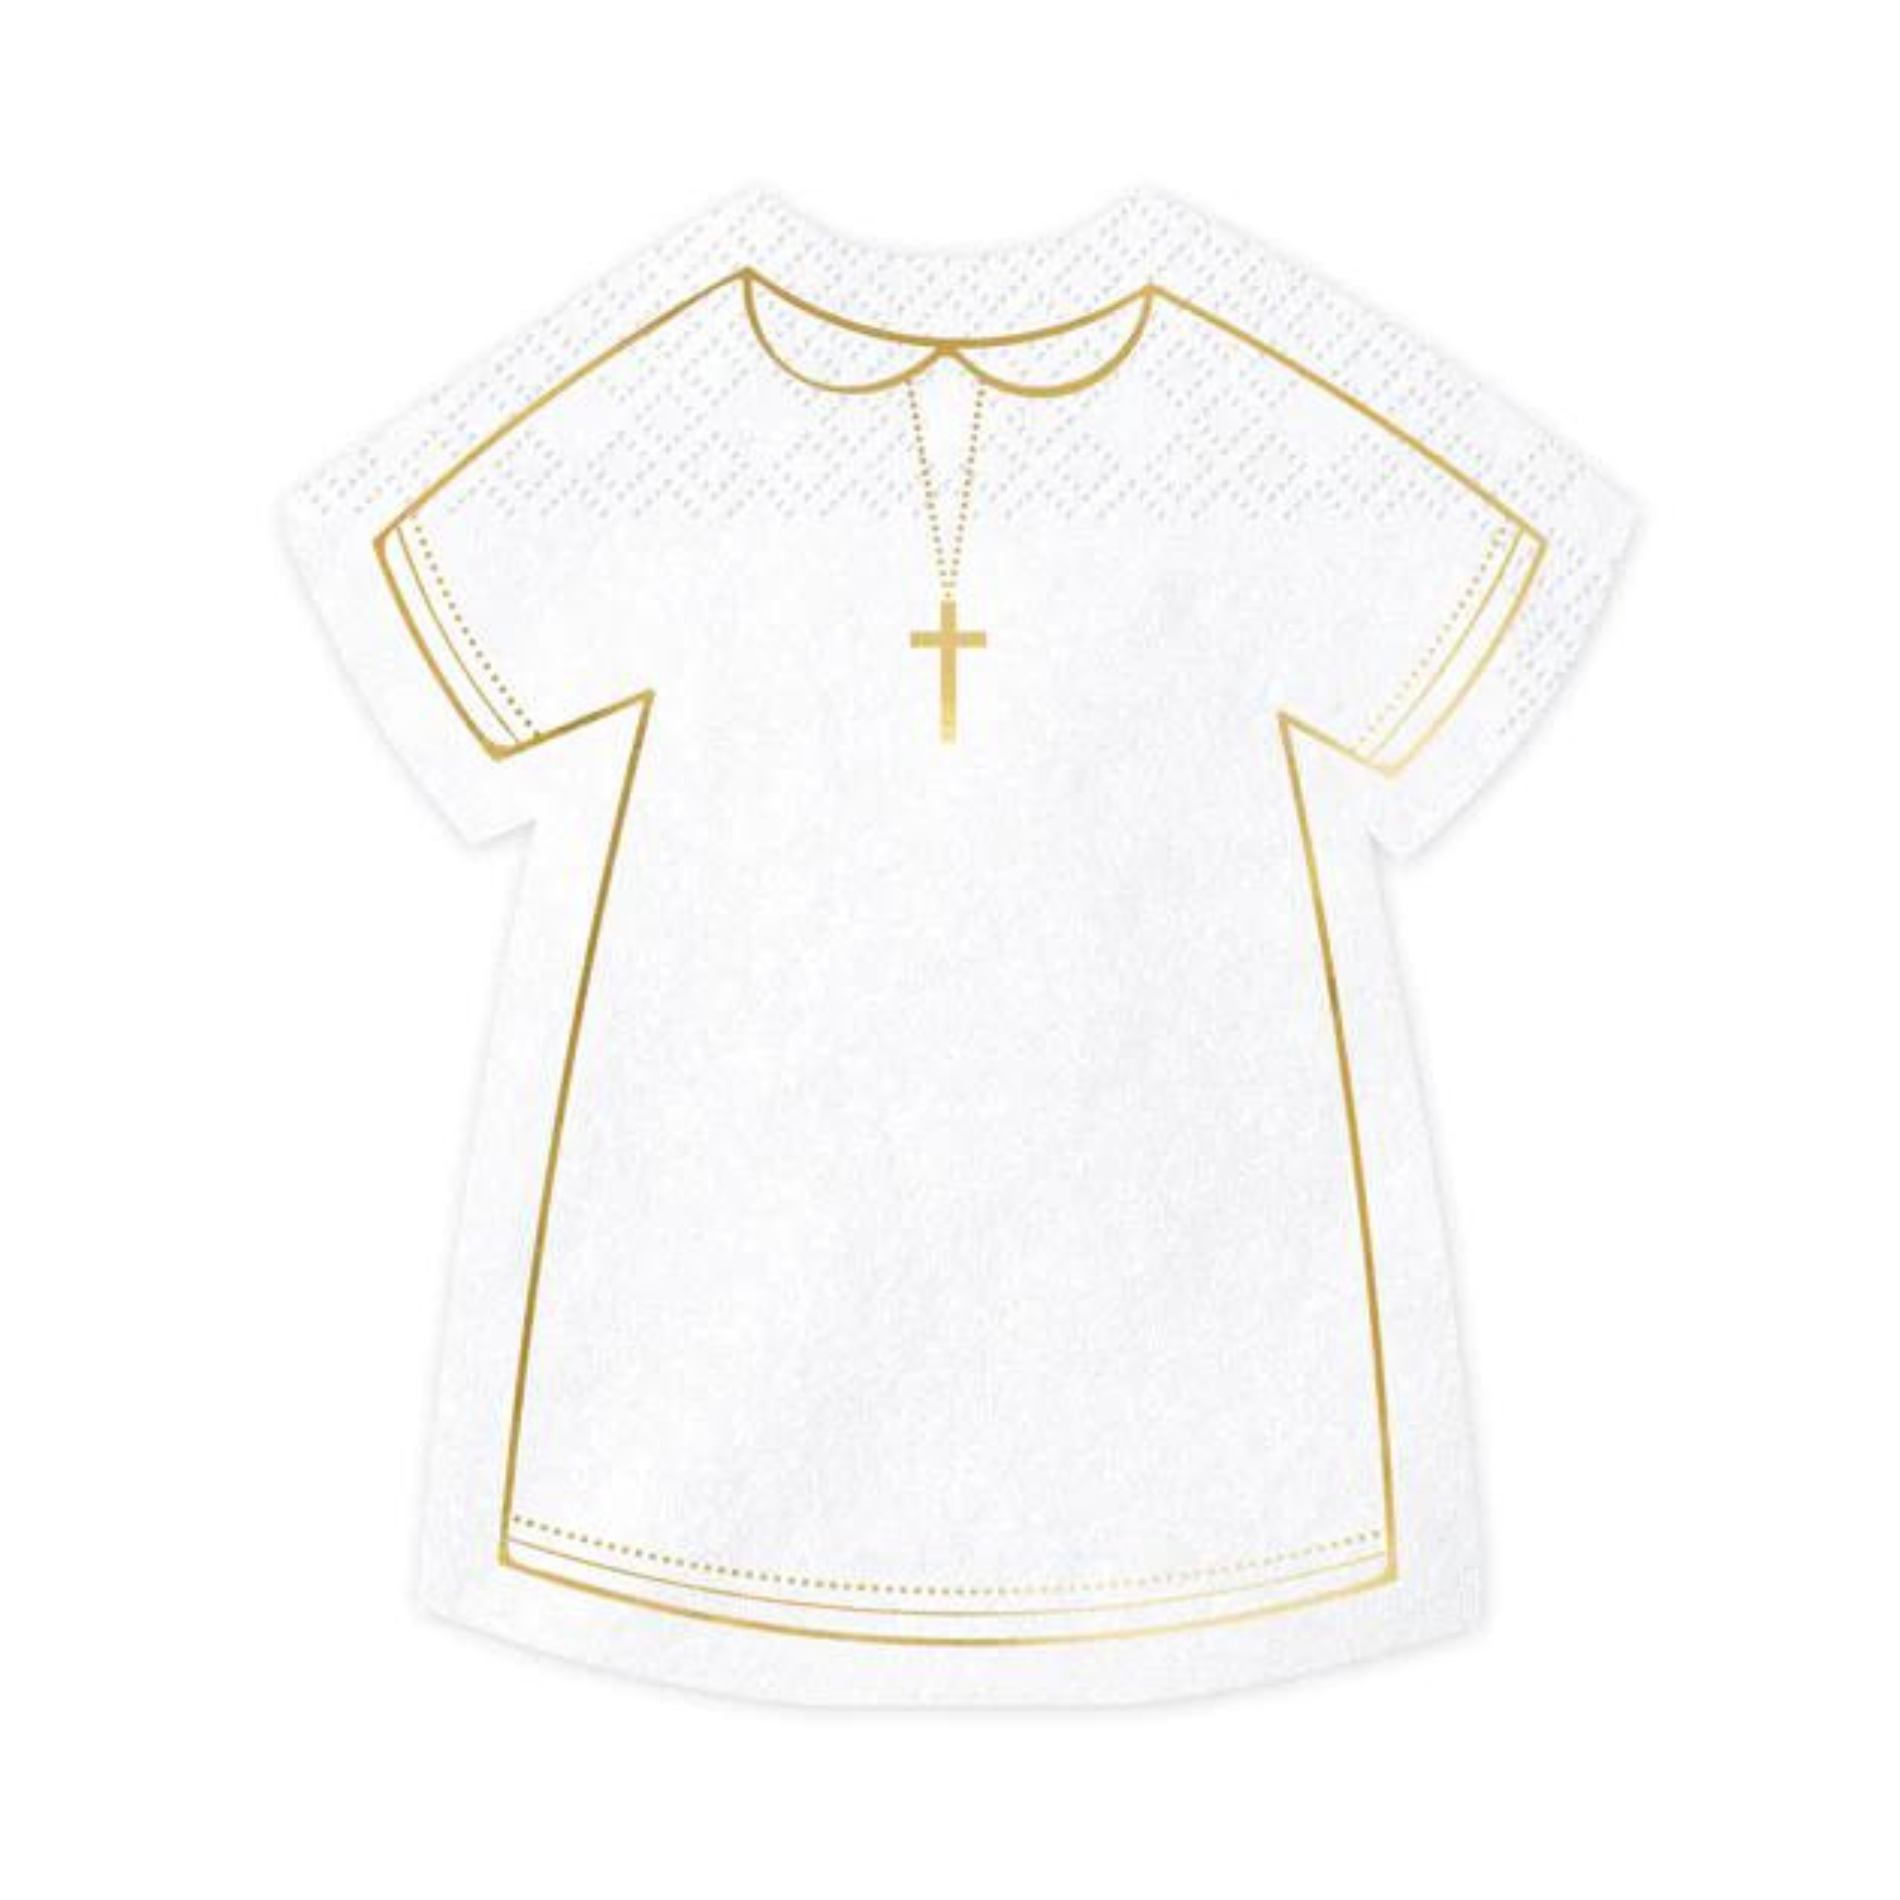 white napkins in the shape of communion gown